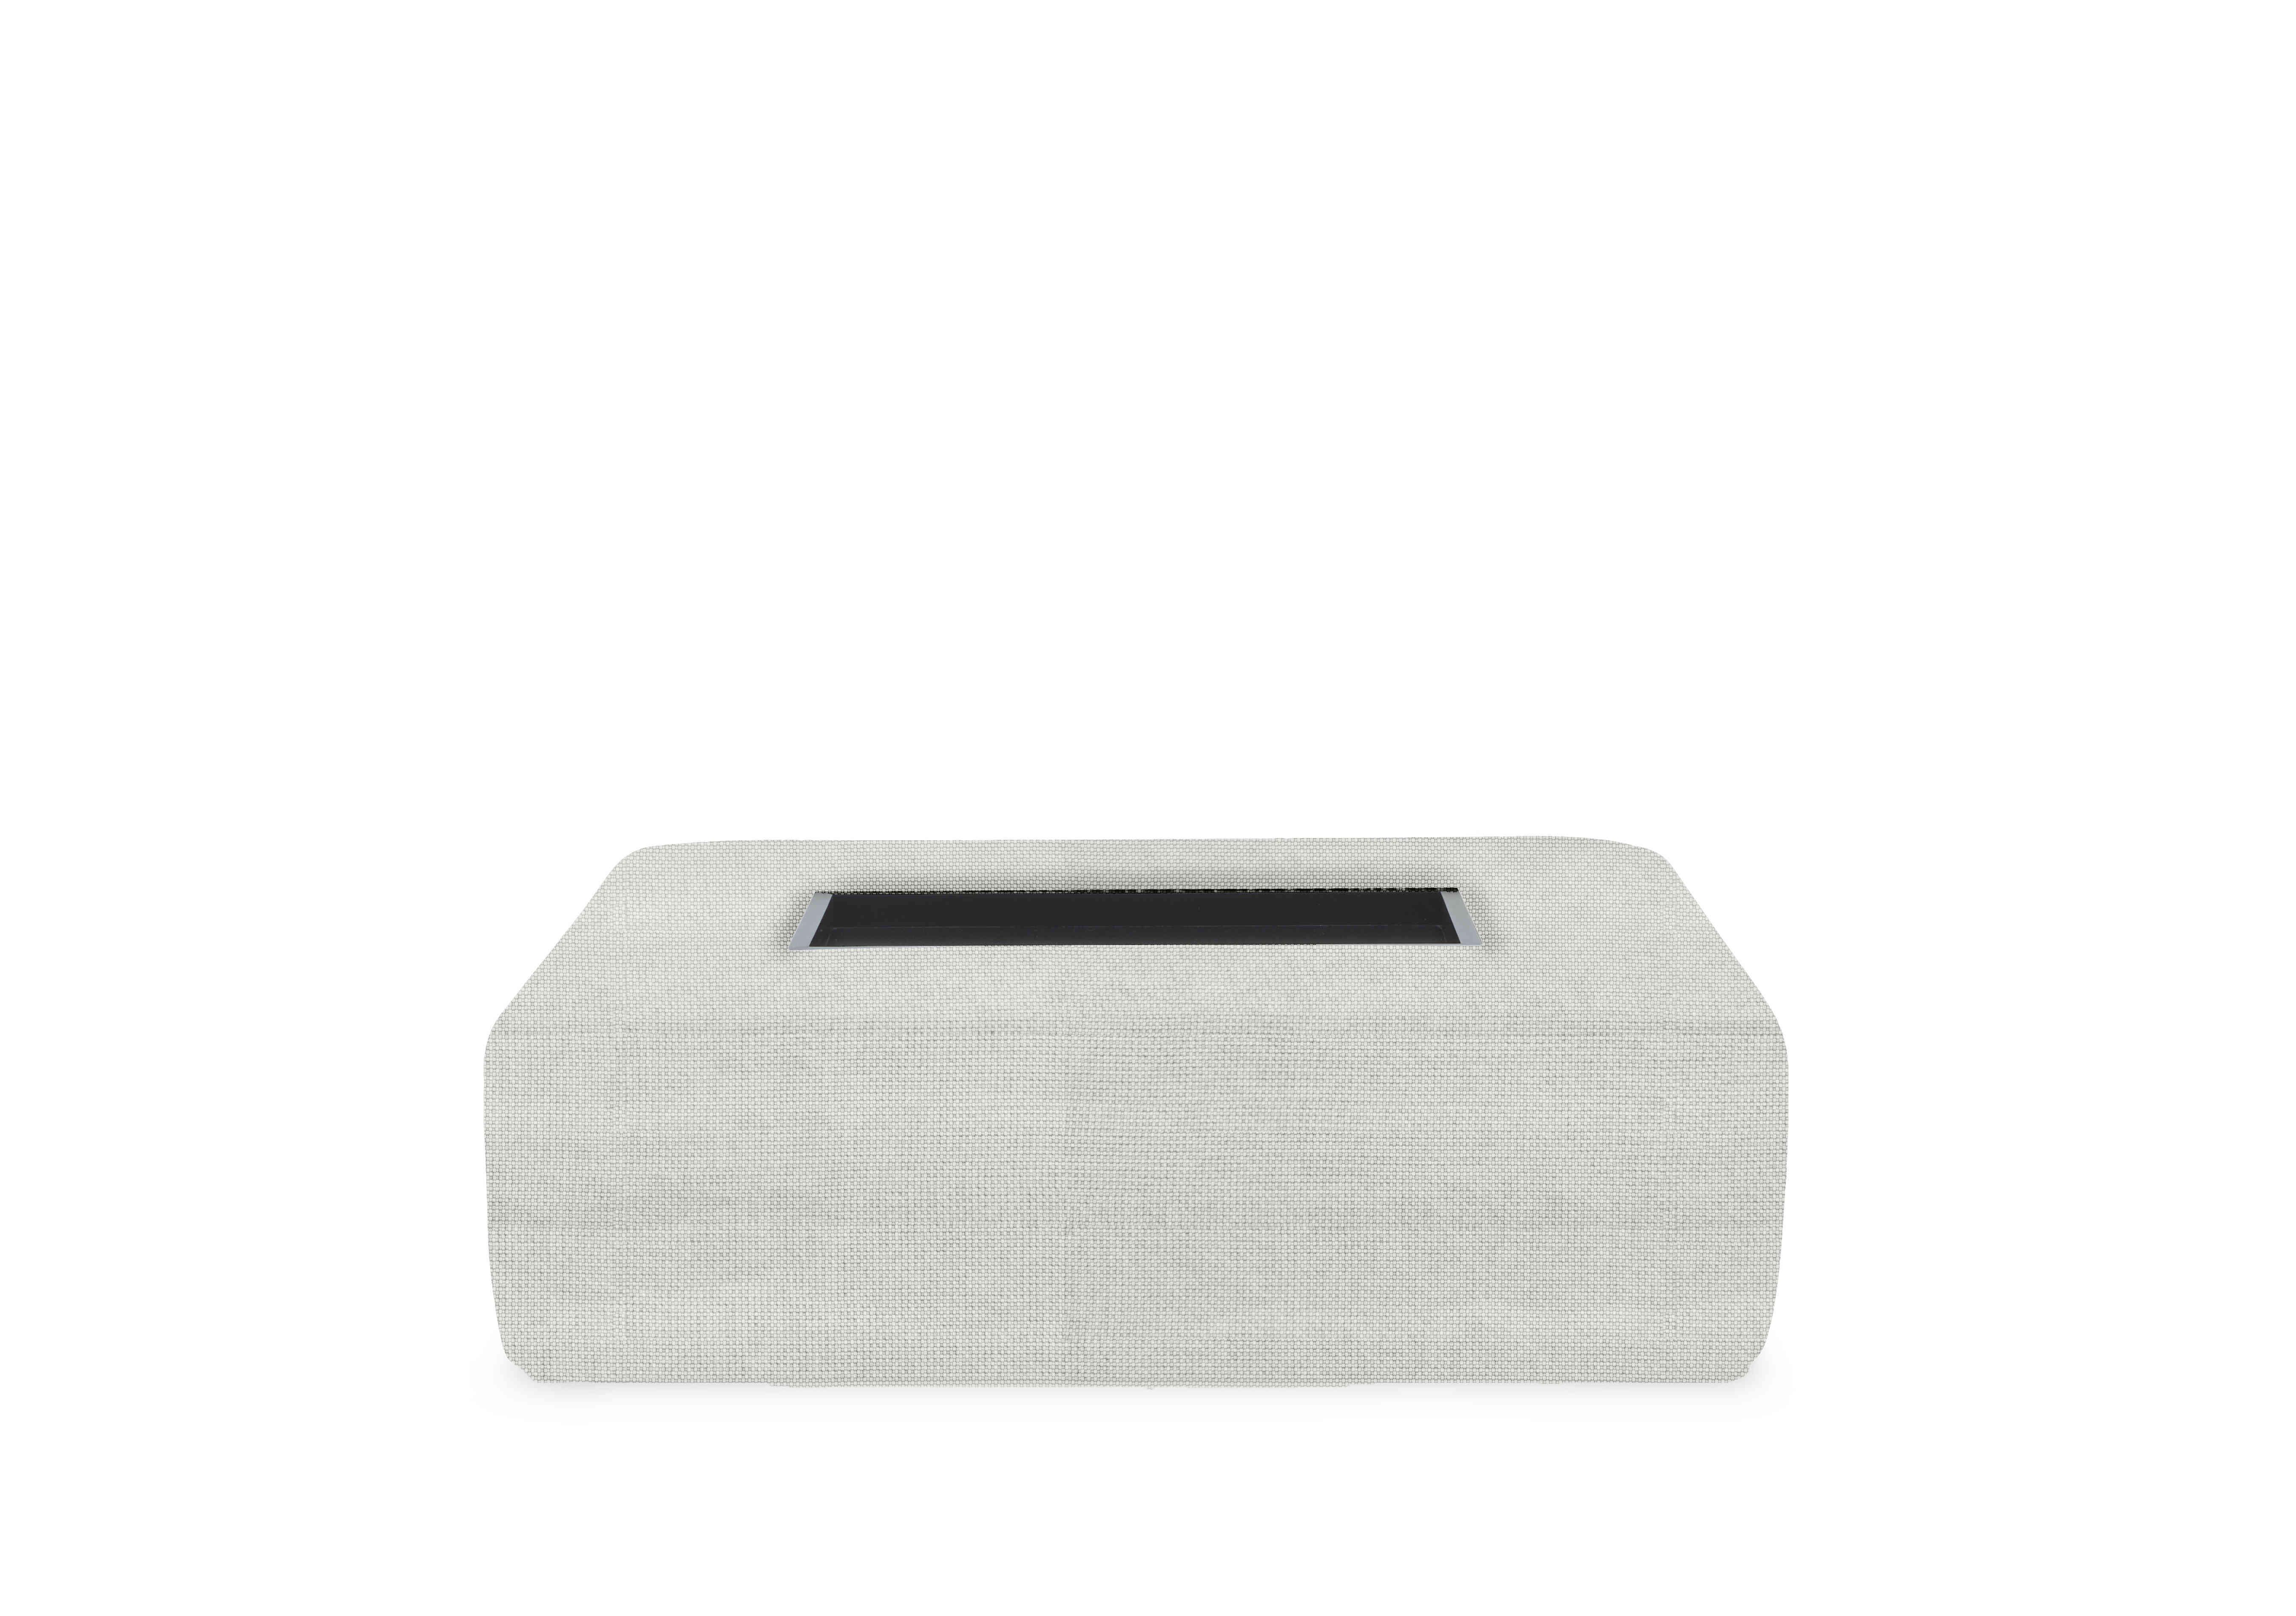 Celine Rectangular Footstool with Wooden Tray in Dice Monochrome Eb Sp on Furniture Village